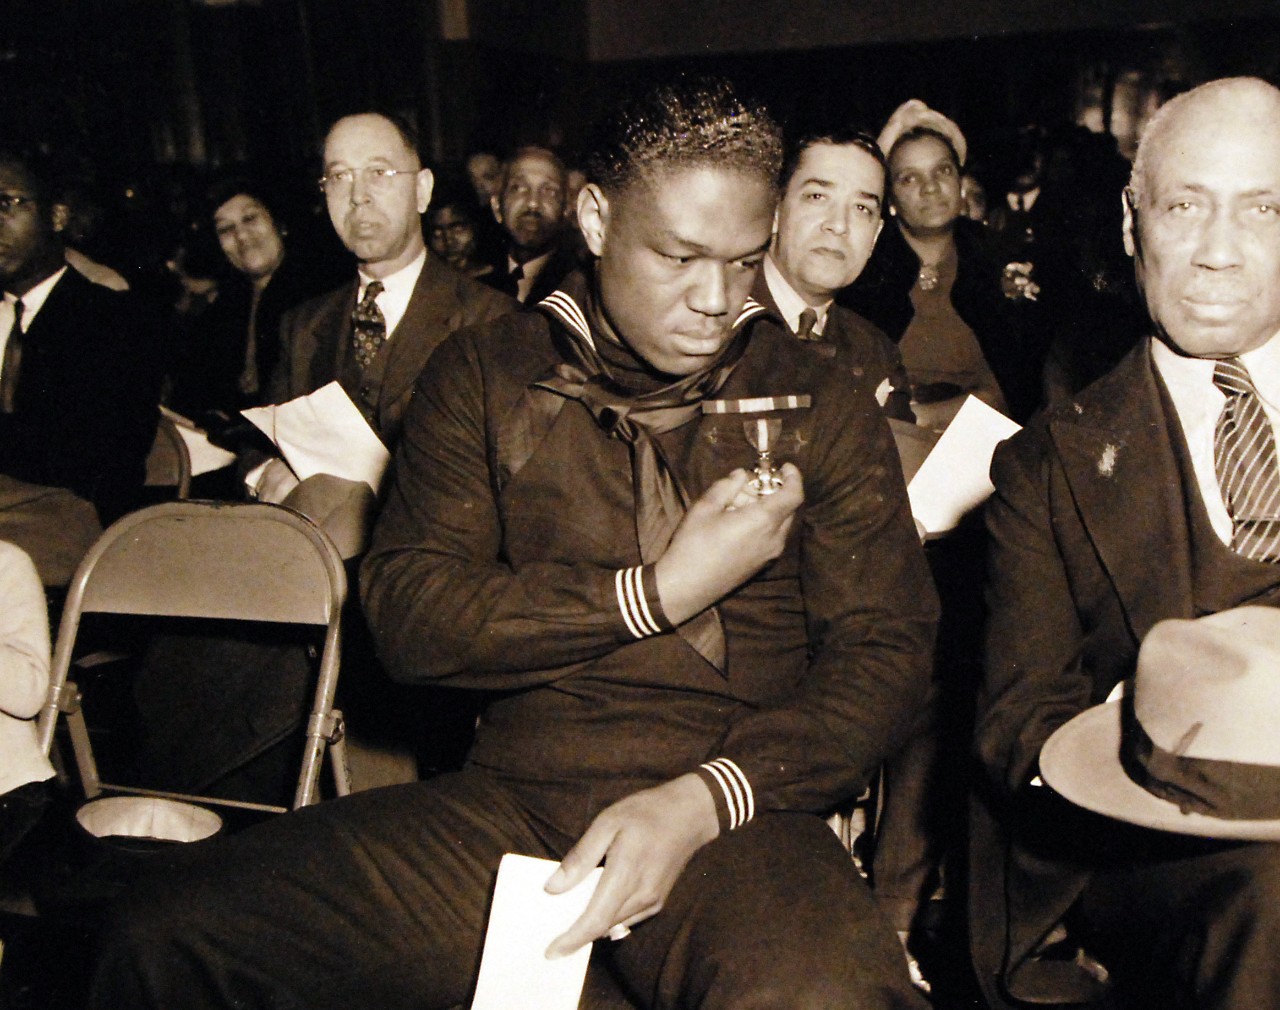 80-G-294803:  Doris Miller, Mess Attendant First Class, USN.  During his visit to the Naval Training Station, Great Lakes, Illinois, 7 January 1943.  He is holding the Navy Cross medal, awarded for heroism during the Pearl Harbor Attack, 7 December 1941.  Official U.S. Navy Photograph, now in the collections of the National Archives.  